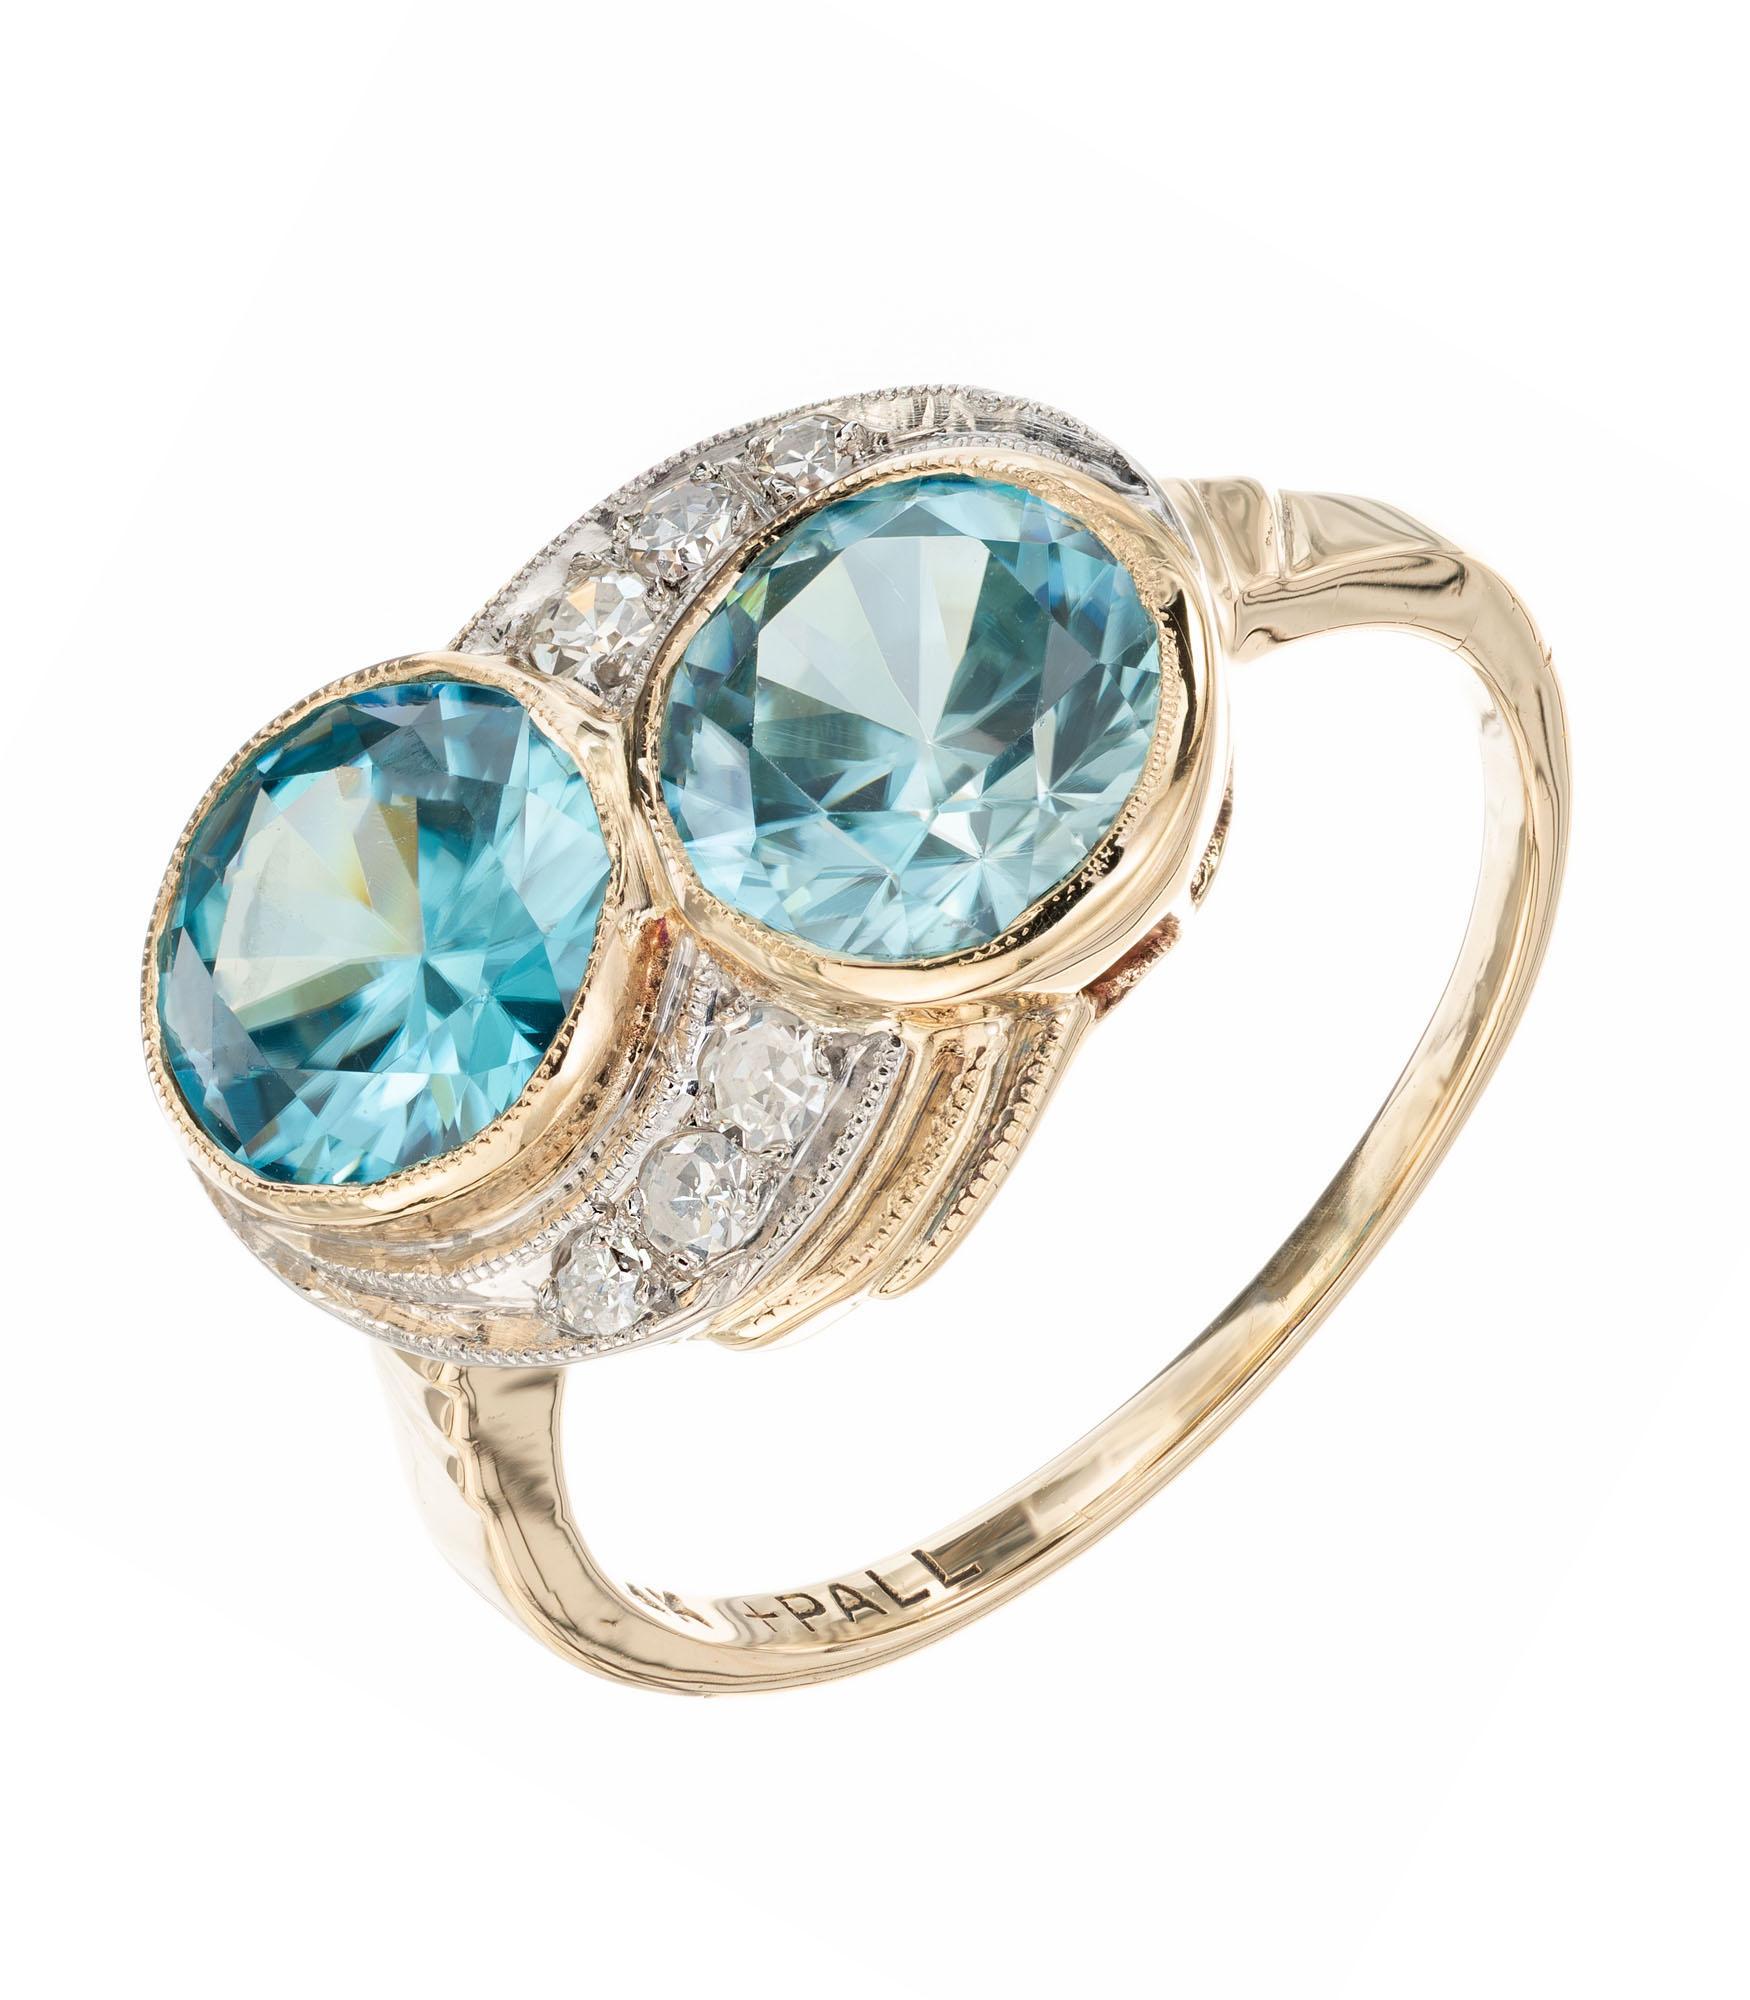 Zircon and diamond engagement ring. 2 round blue zircons set in 14k yellow gold with 6 single cut accent diamonds set in pallidum. Circa 1940's.

2 round greenish blue zircon, VS approx. 3.44cts
6 single cut diamonds, H-I SI approx. .8cts
Size 5.5